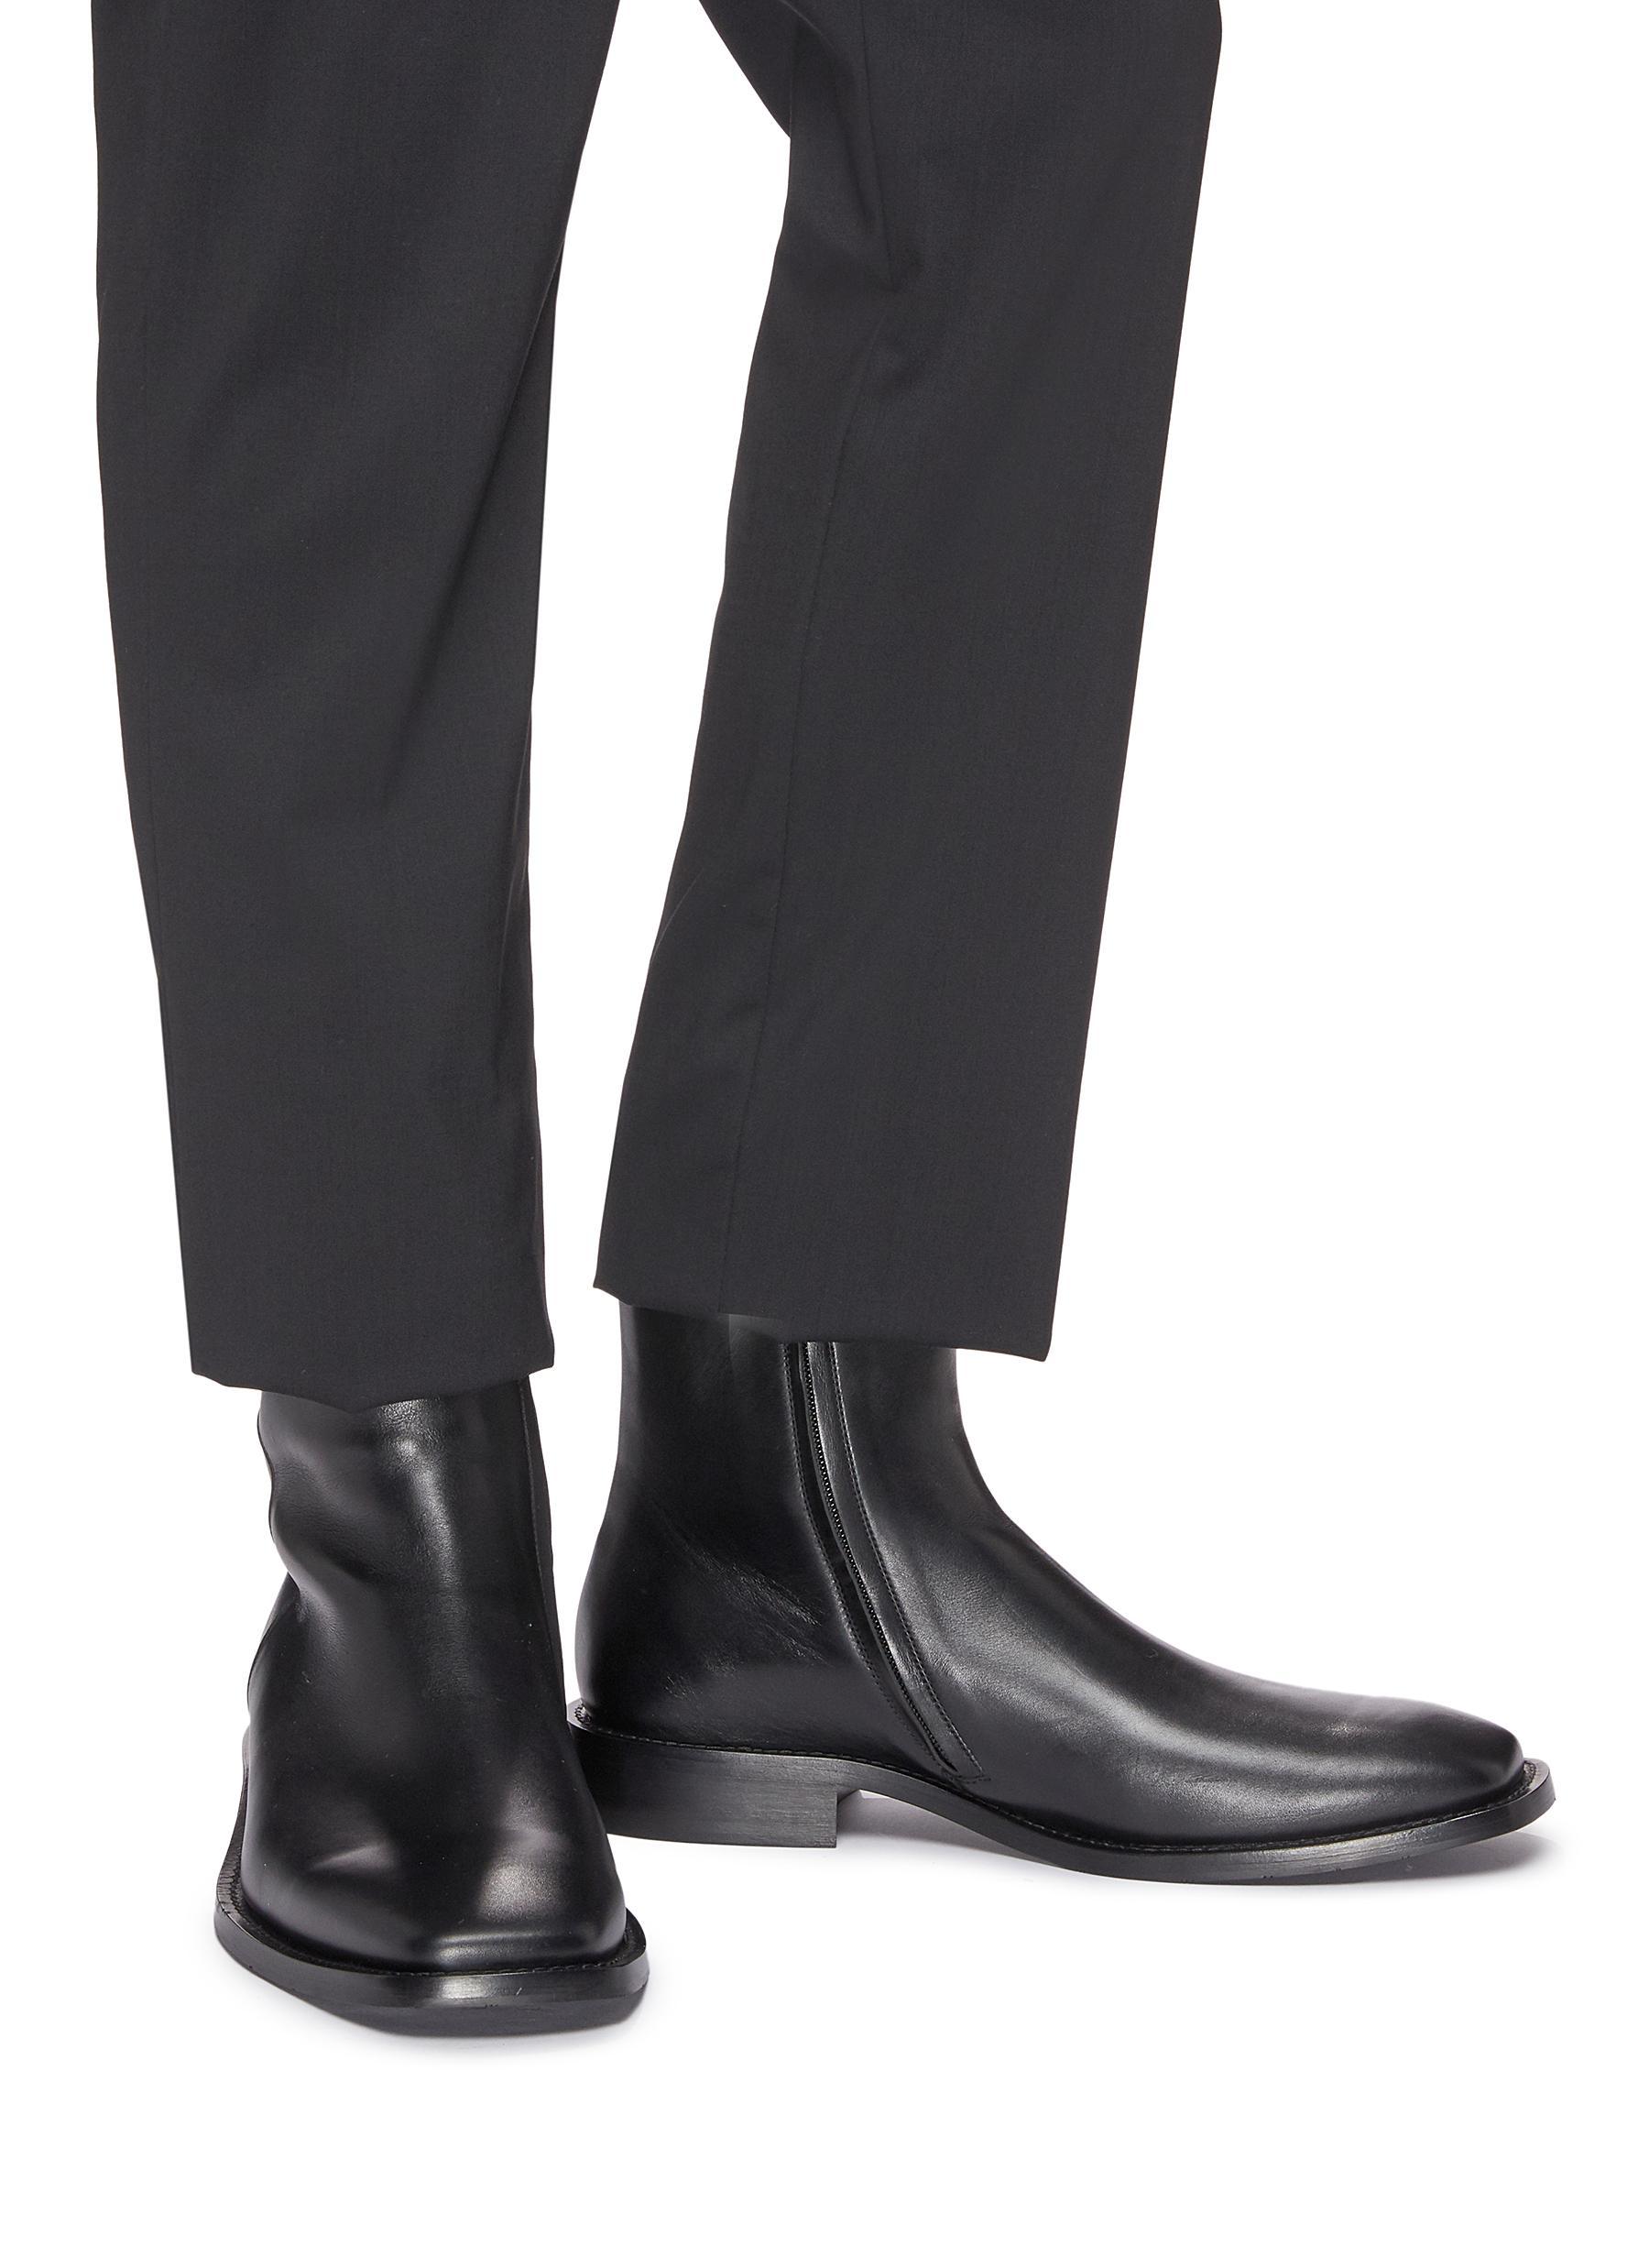 Balenciaga 'rim' Zip Leather Boots in Black for Men | Lyst